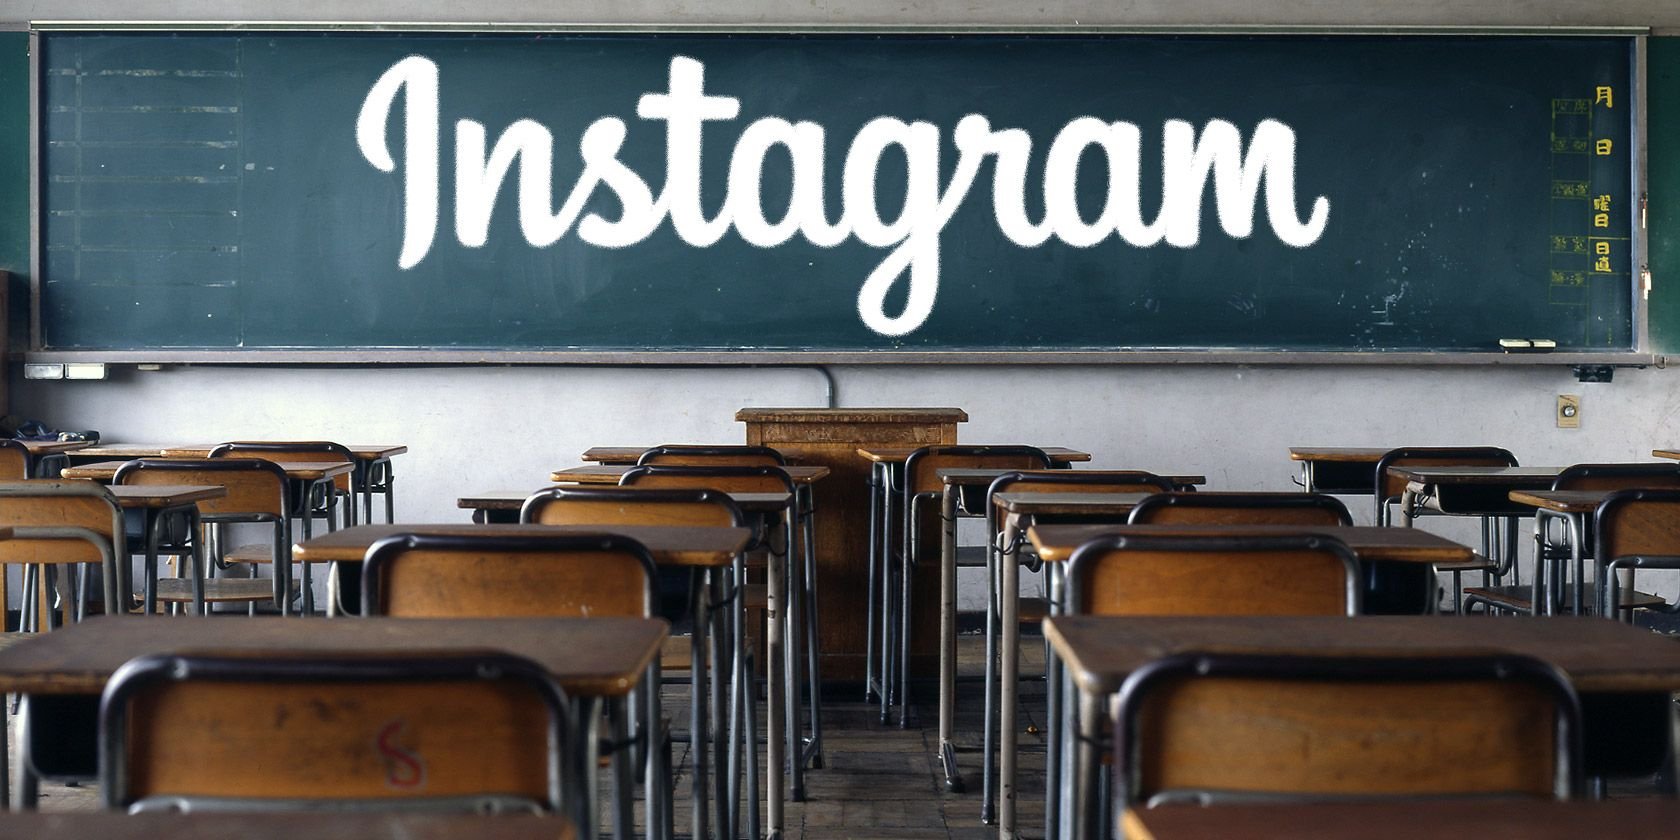 The 18 Best Educational Instagram Accounts for Students